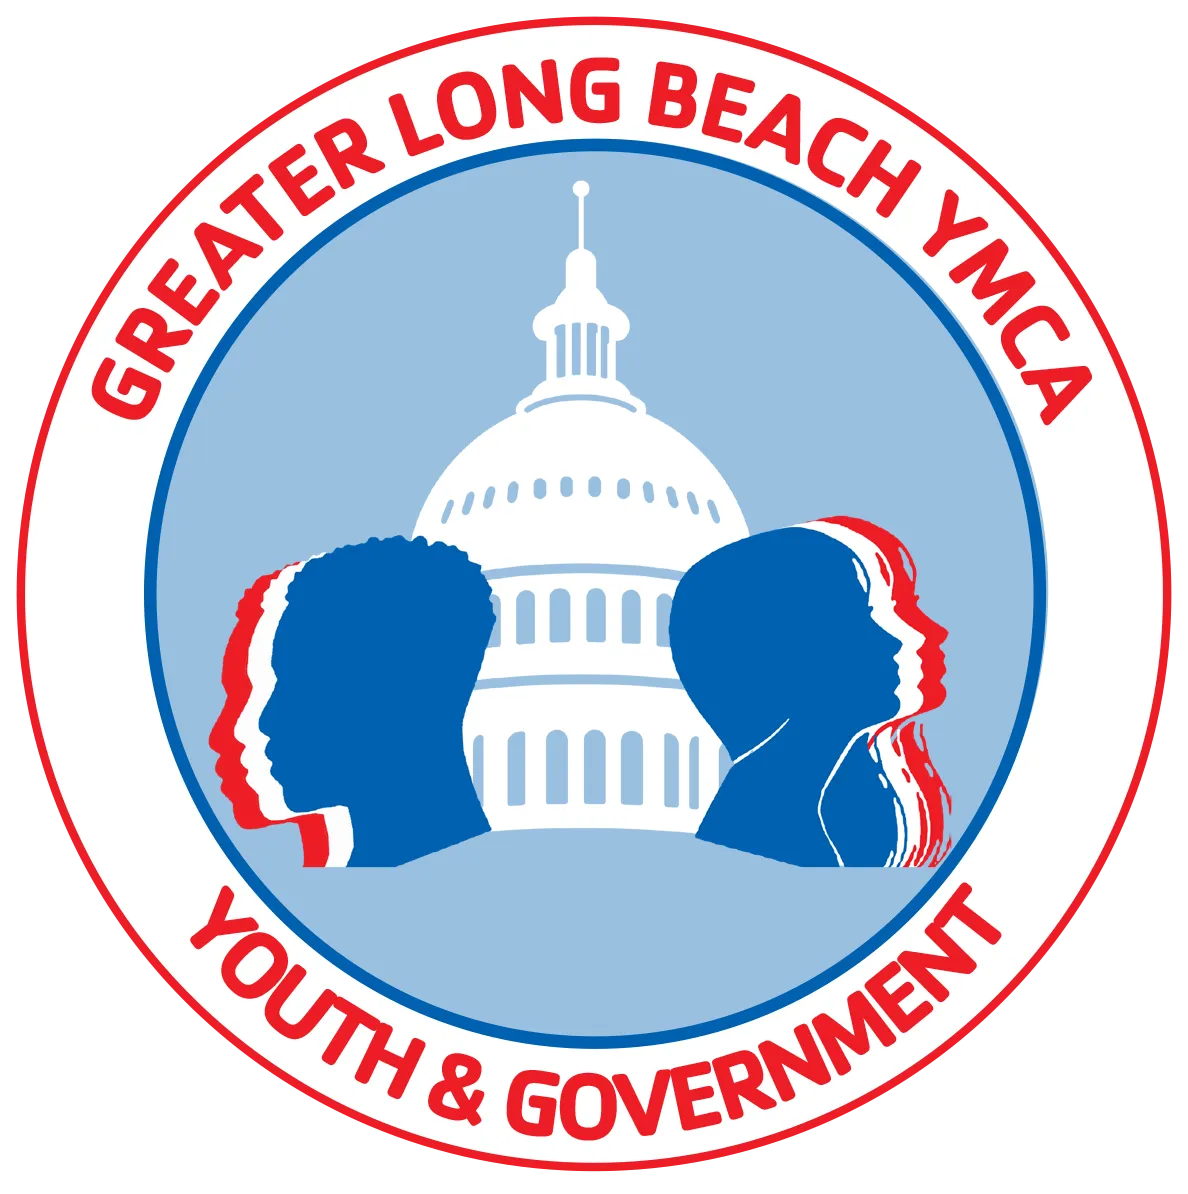 Youth & Government Logo